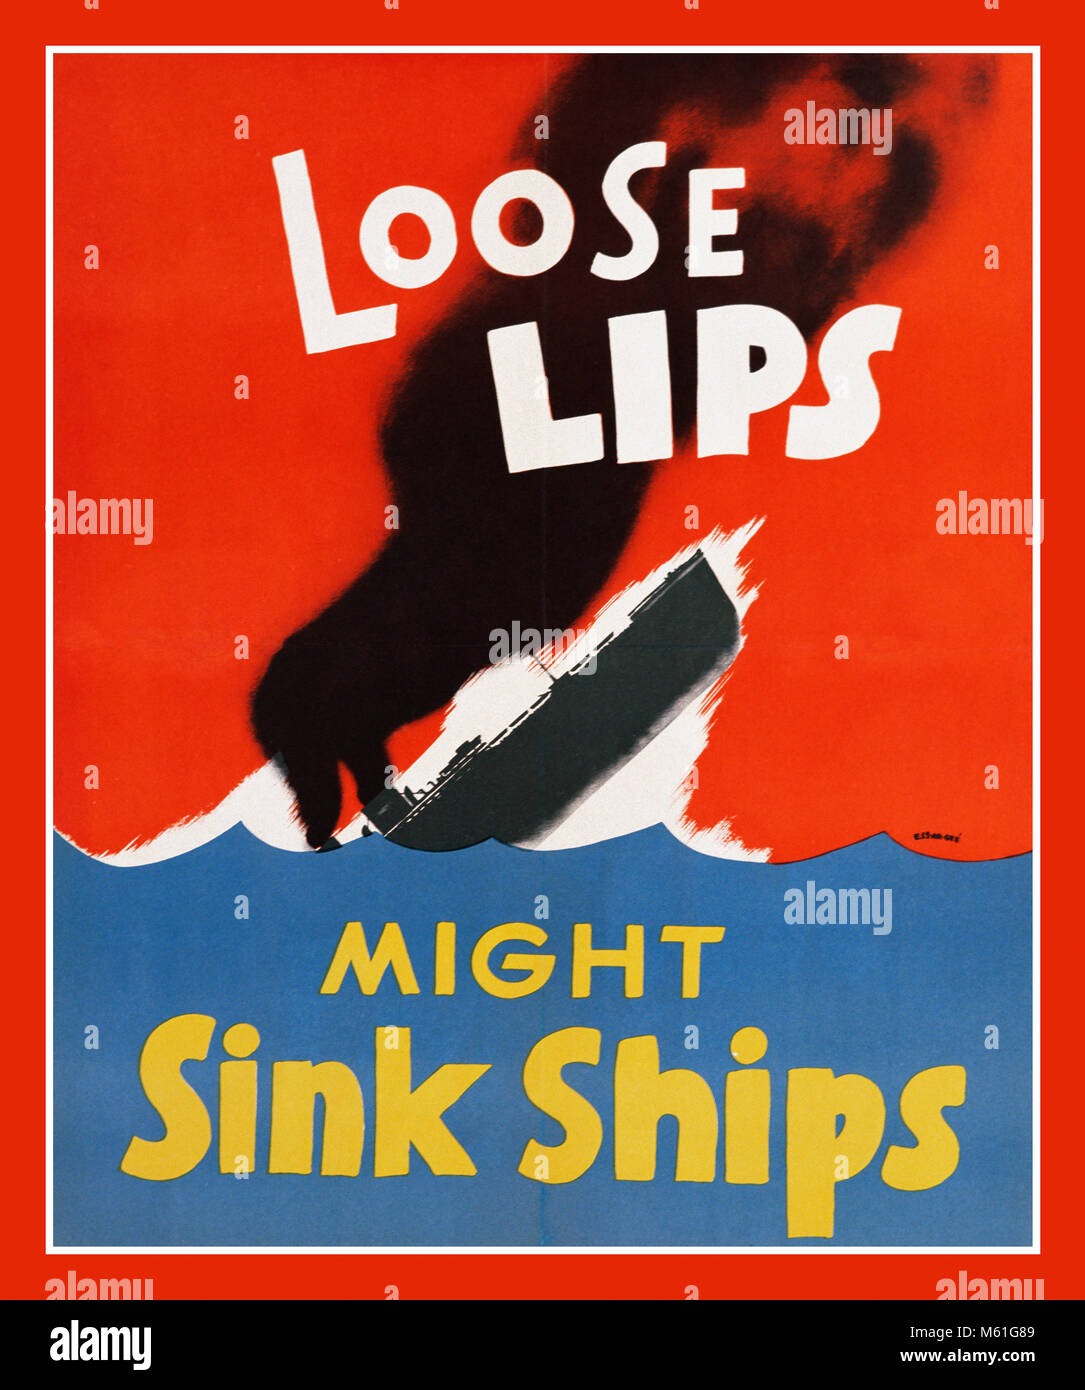 Vintage USA poster 1940's WW2  American Naval marine propaganda cautionary poster 'LOOSE LIPS MIGHT SINK SHIPS' (The enemy is listening) Stock Photo